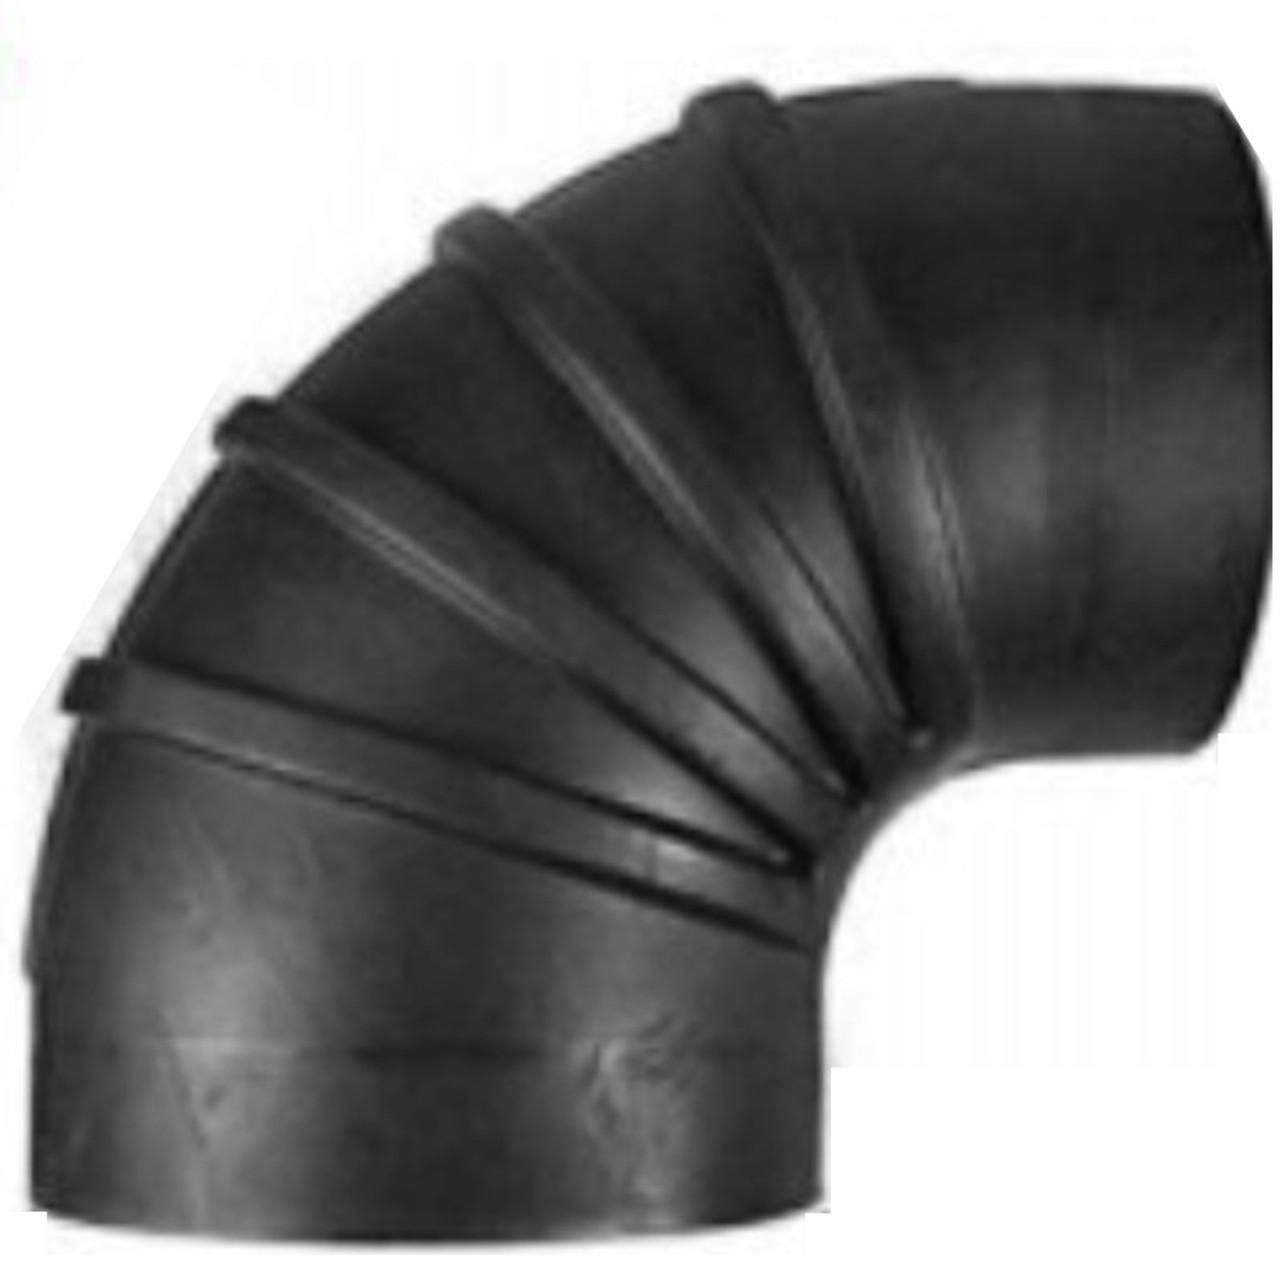 Rubber Elbow 3.5 ID X 90 Degree: Intake Hoses